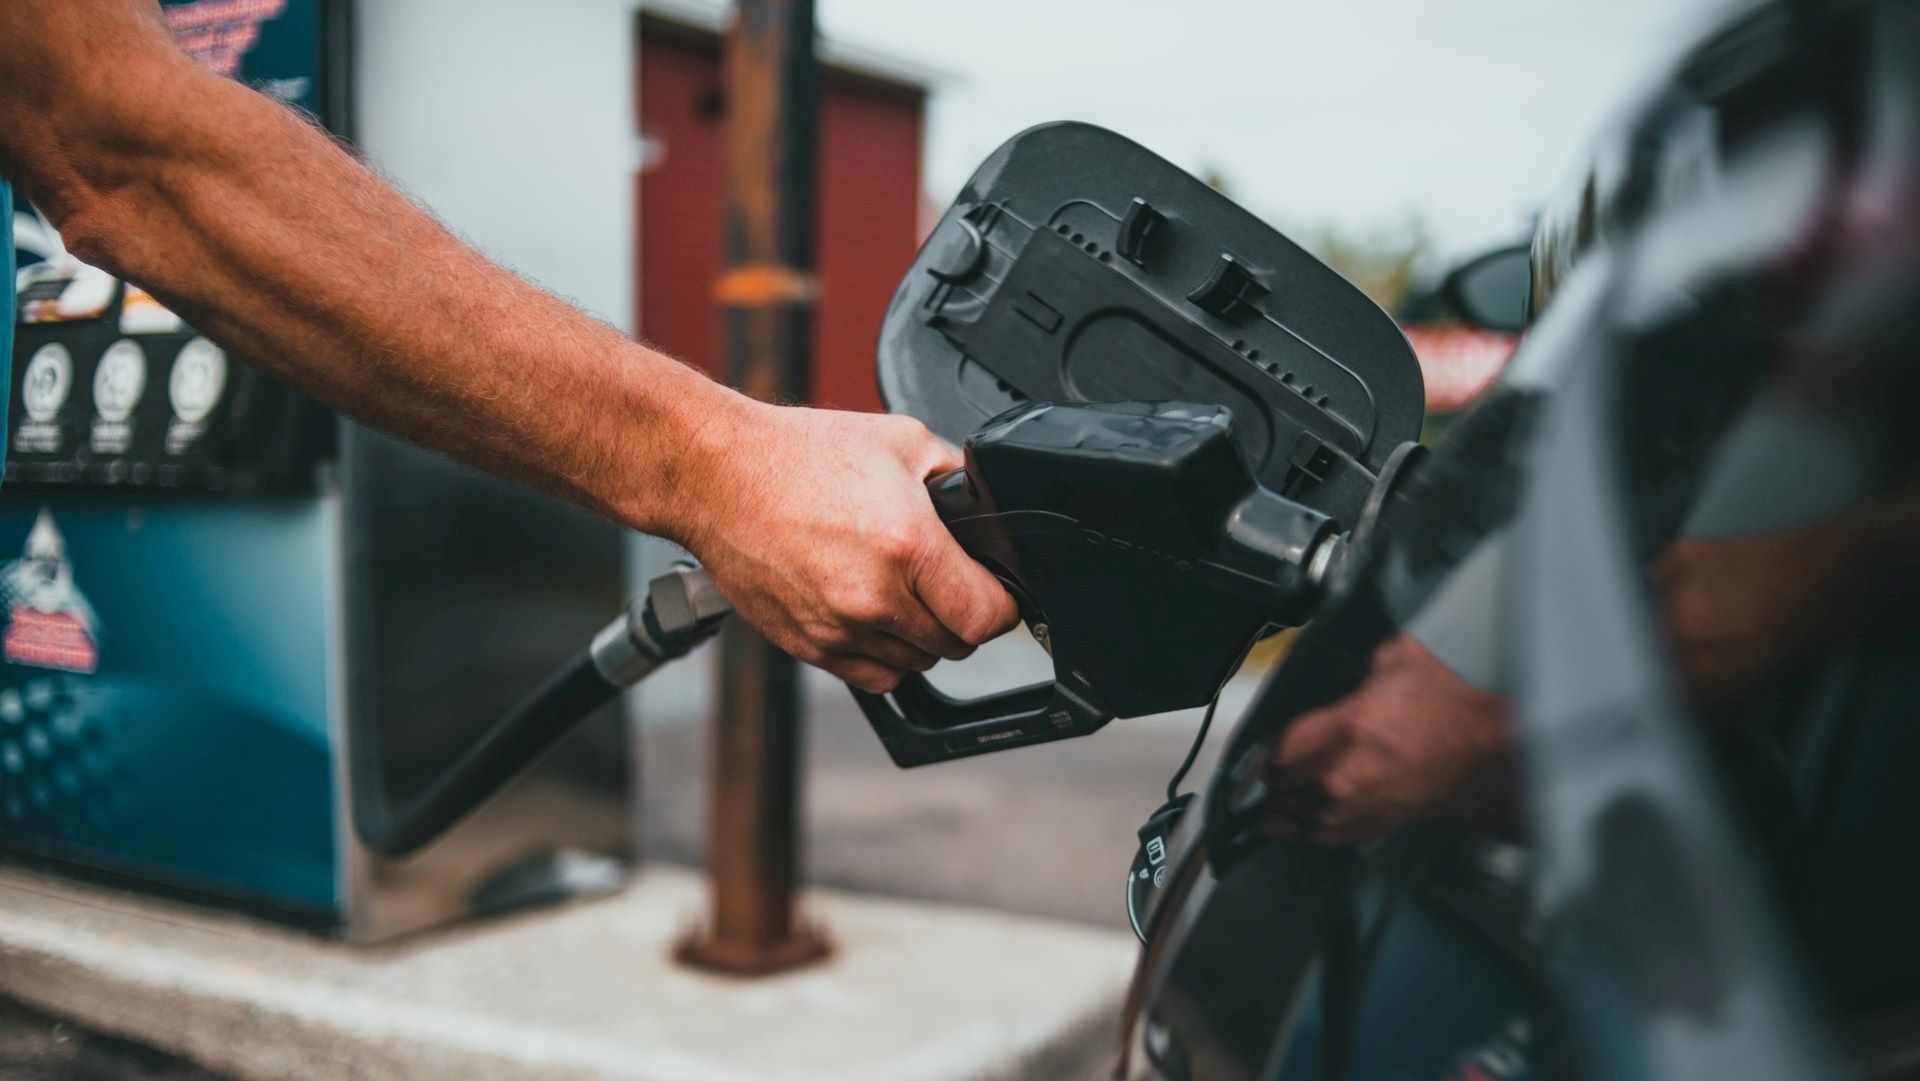 The gas tax is a regressive tax with a disproportionate impact on those who can least afford it. It cannot be the solution to America's infrastructure woes.